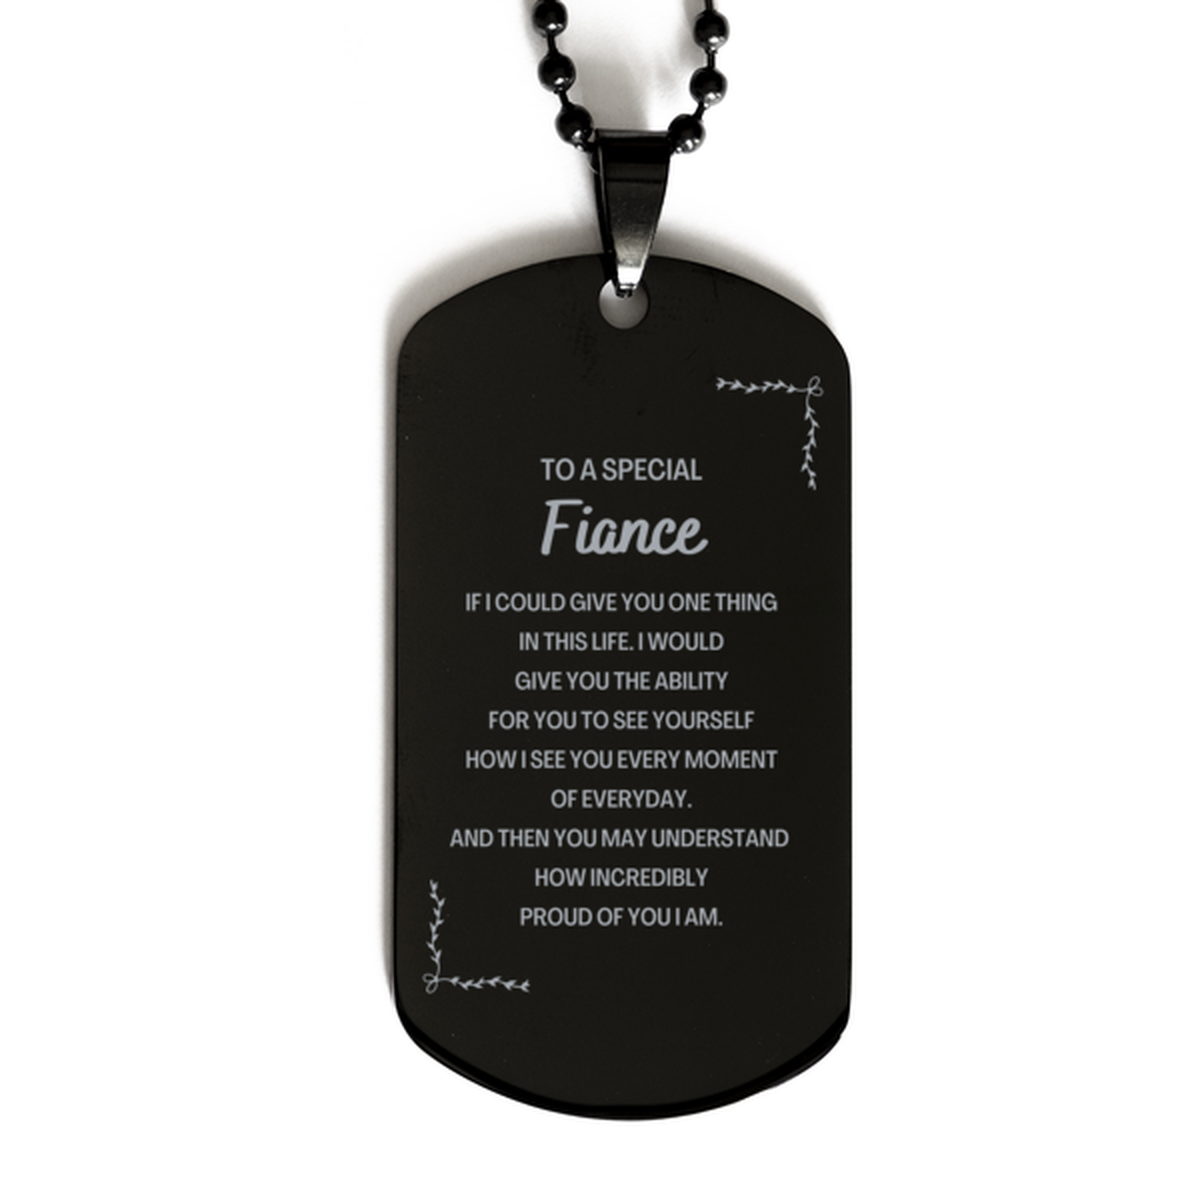 To My Fiance Black Dog Tag, Gifts For Fiance Engraved, Inspirational Gifts for Christmas Birthday, Epic Gifts for Fiance To A Special Fiance how incredibly proud of you I am